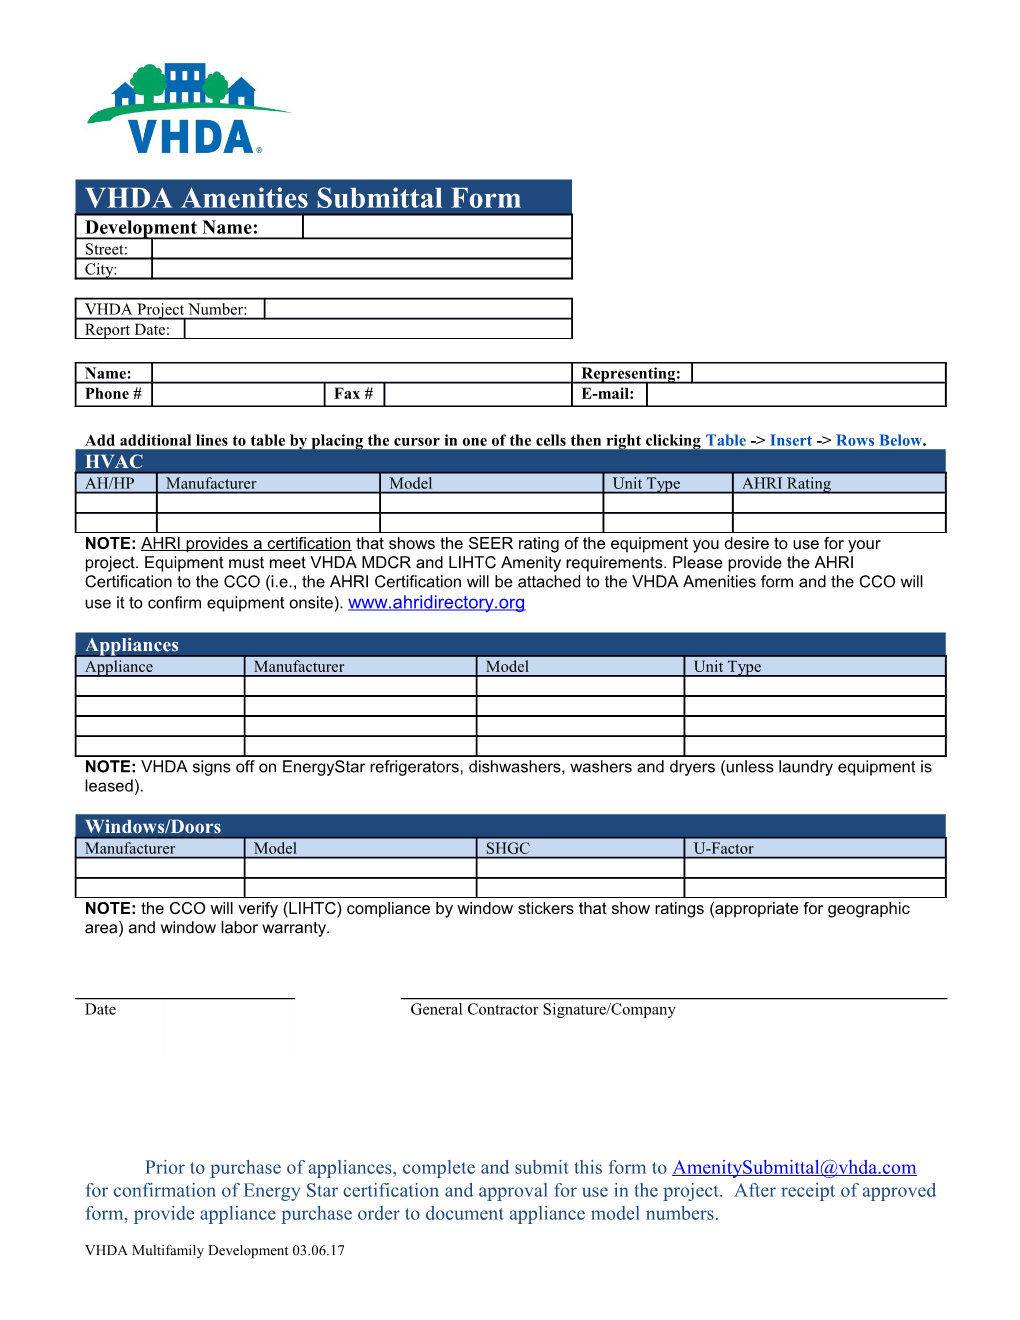 Appliance Submittal Form